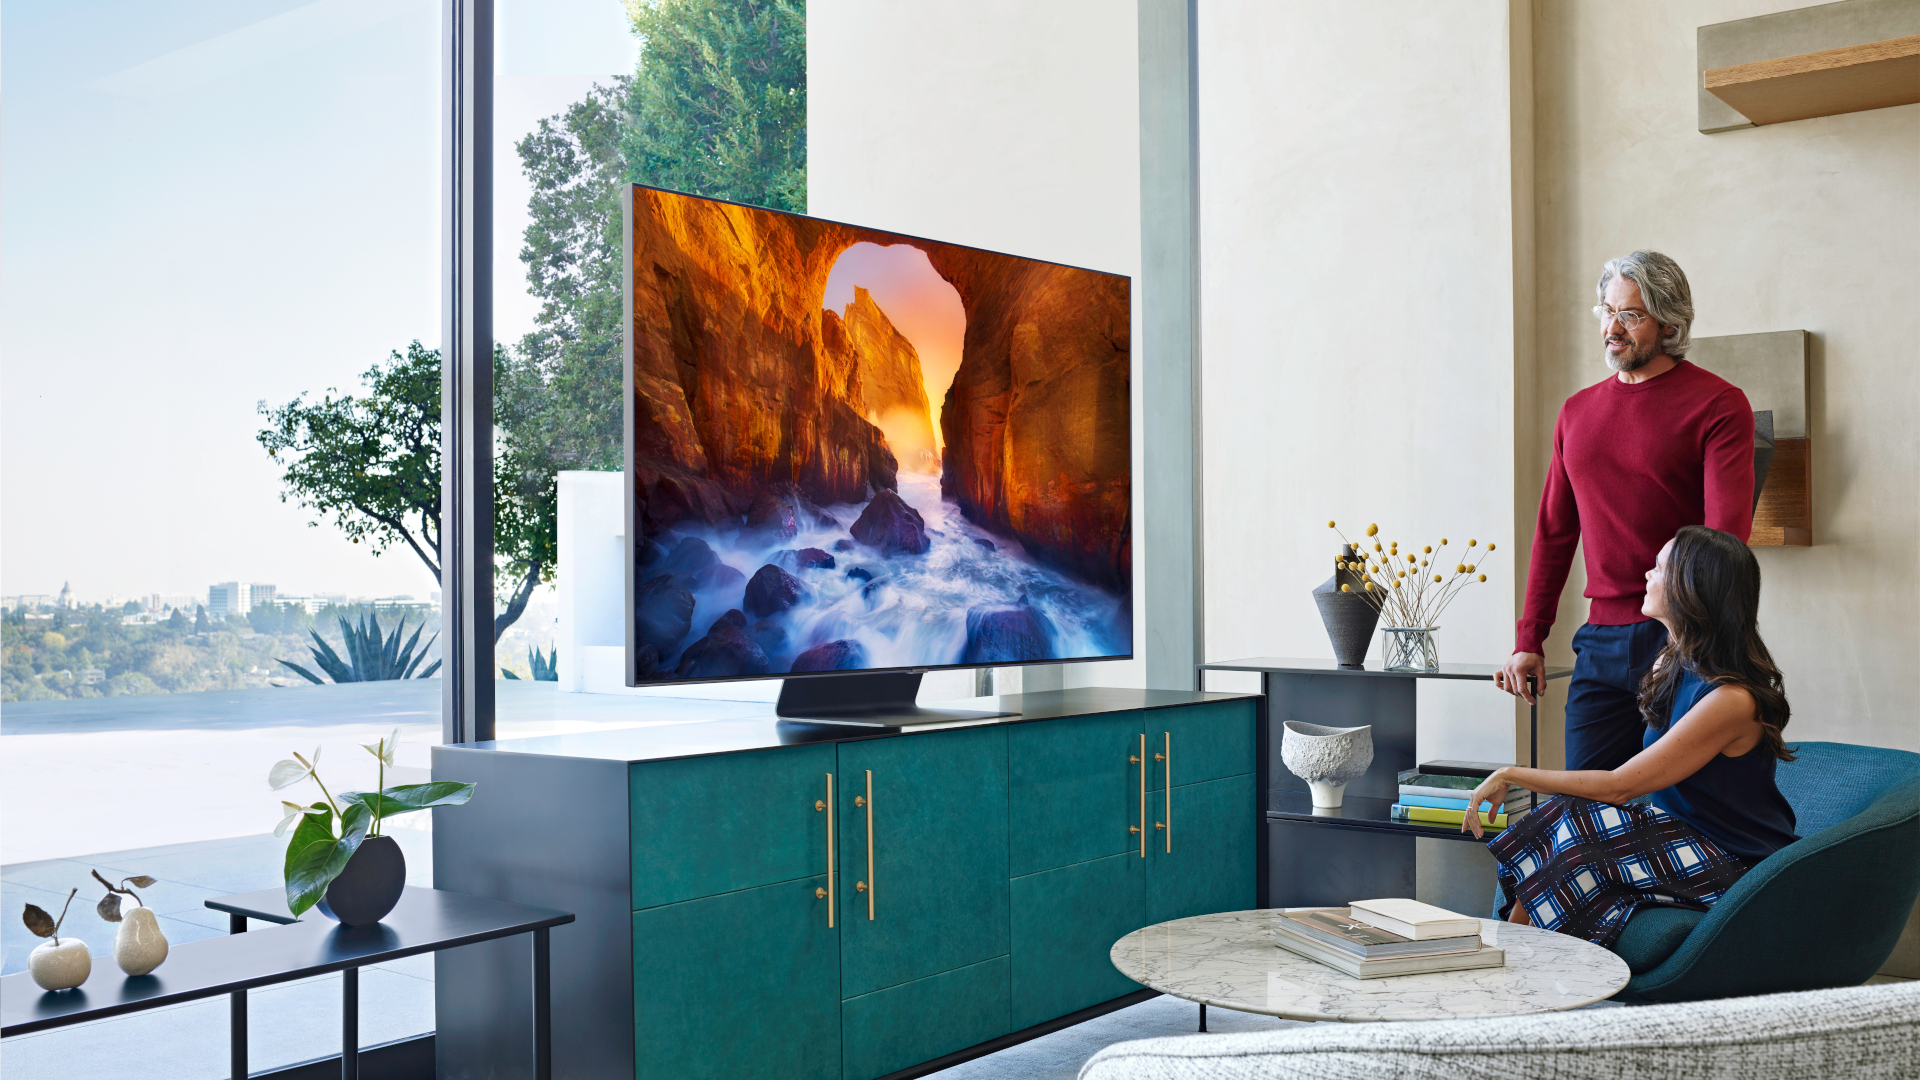 Samsung TV Catalog 2019: Every new Samsung TV coming in 2019 4